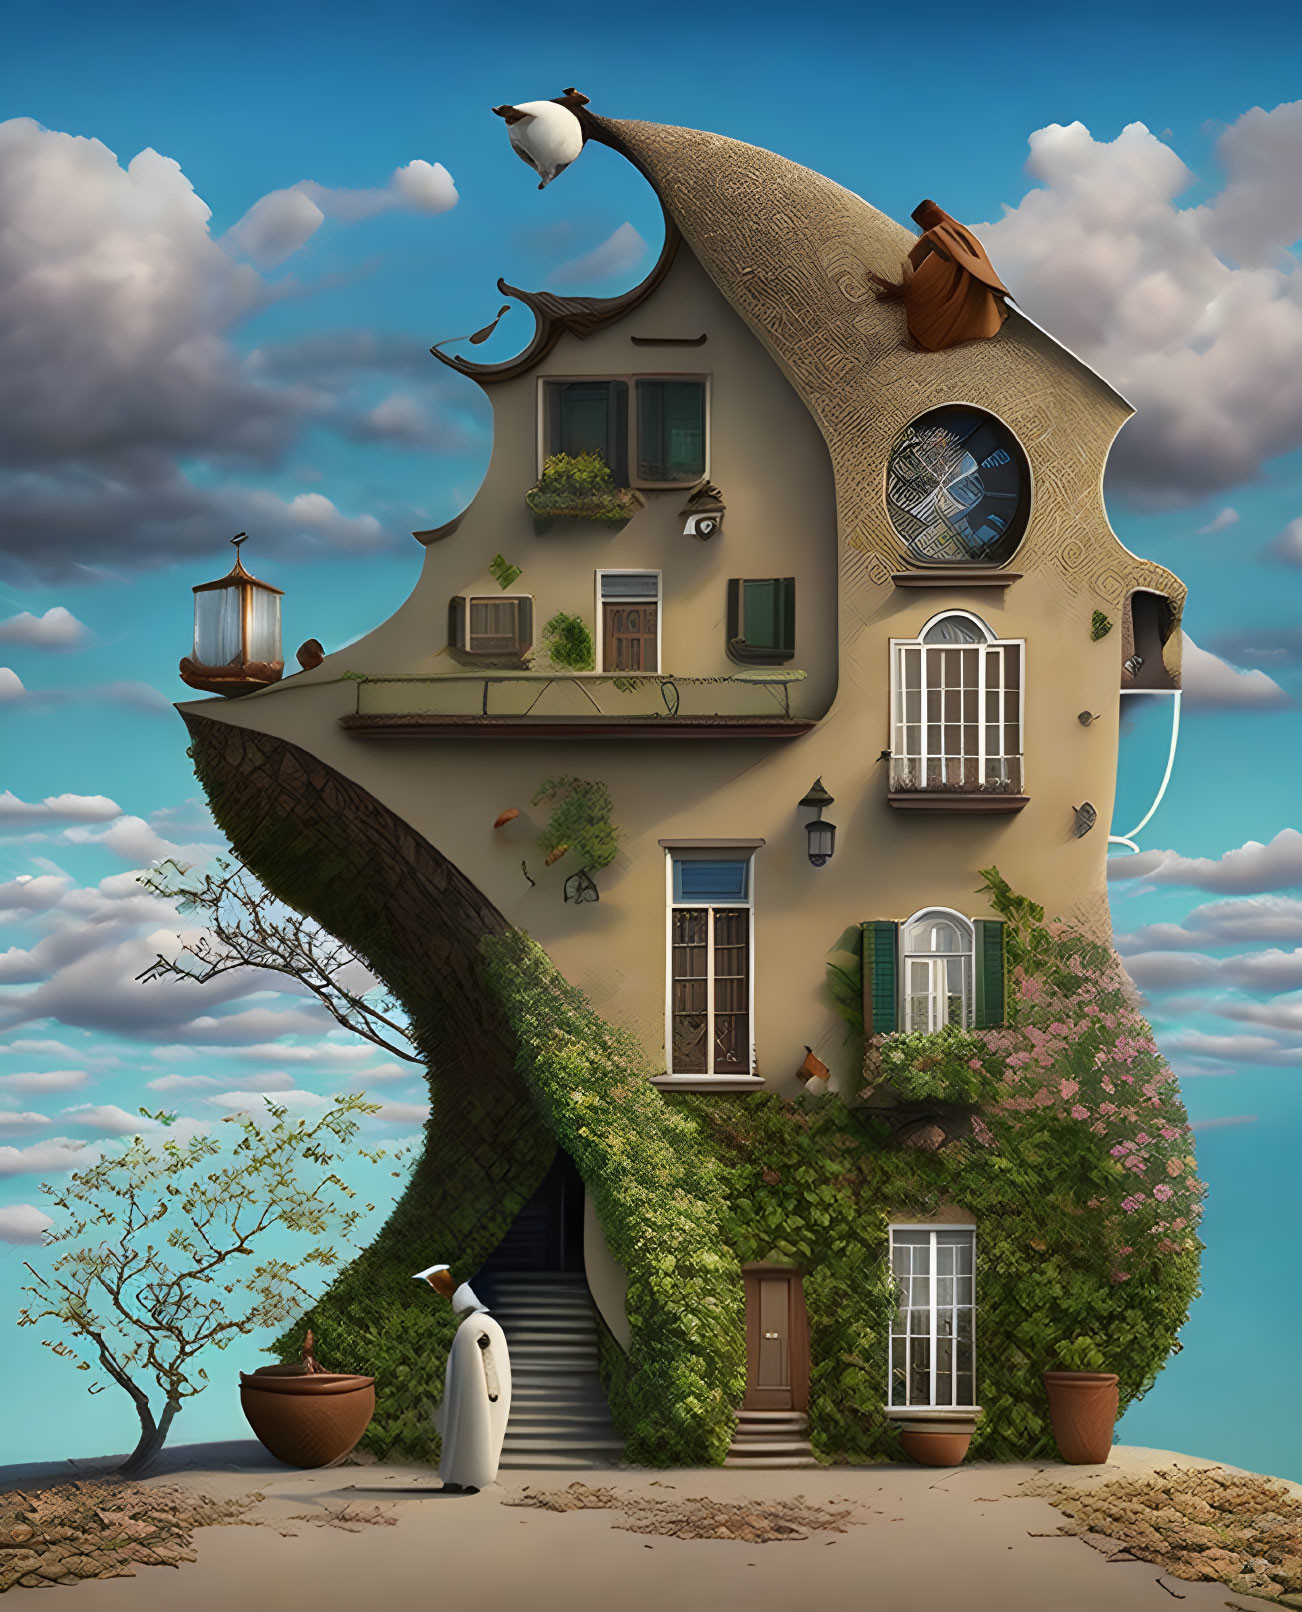 Curved vine-covered house with bird and figure under cloudy sky